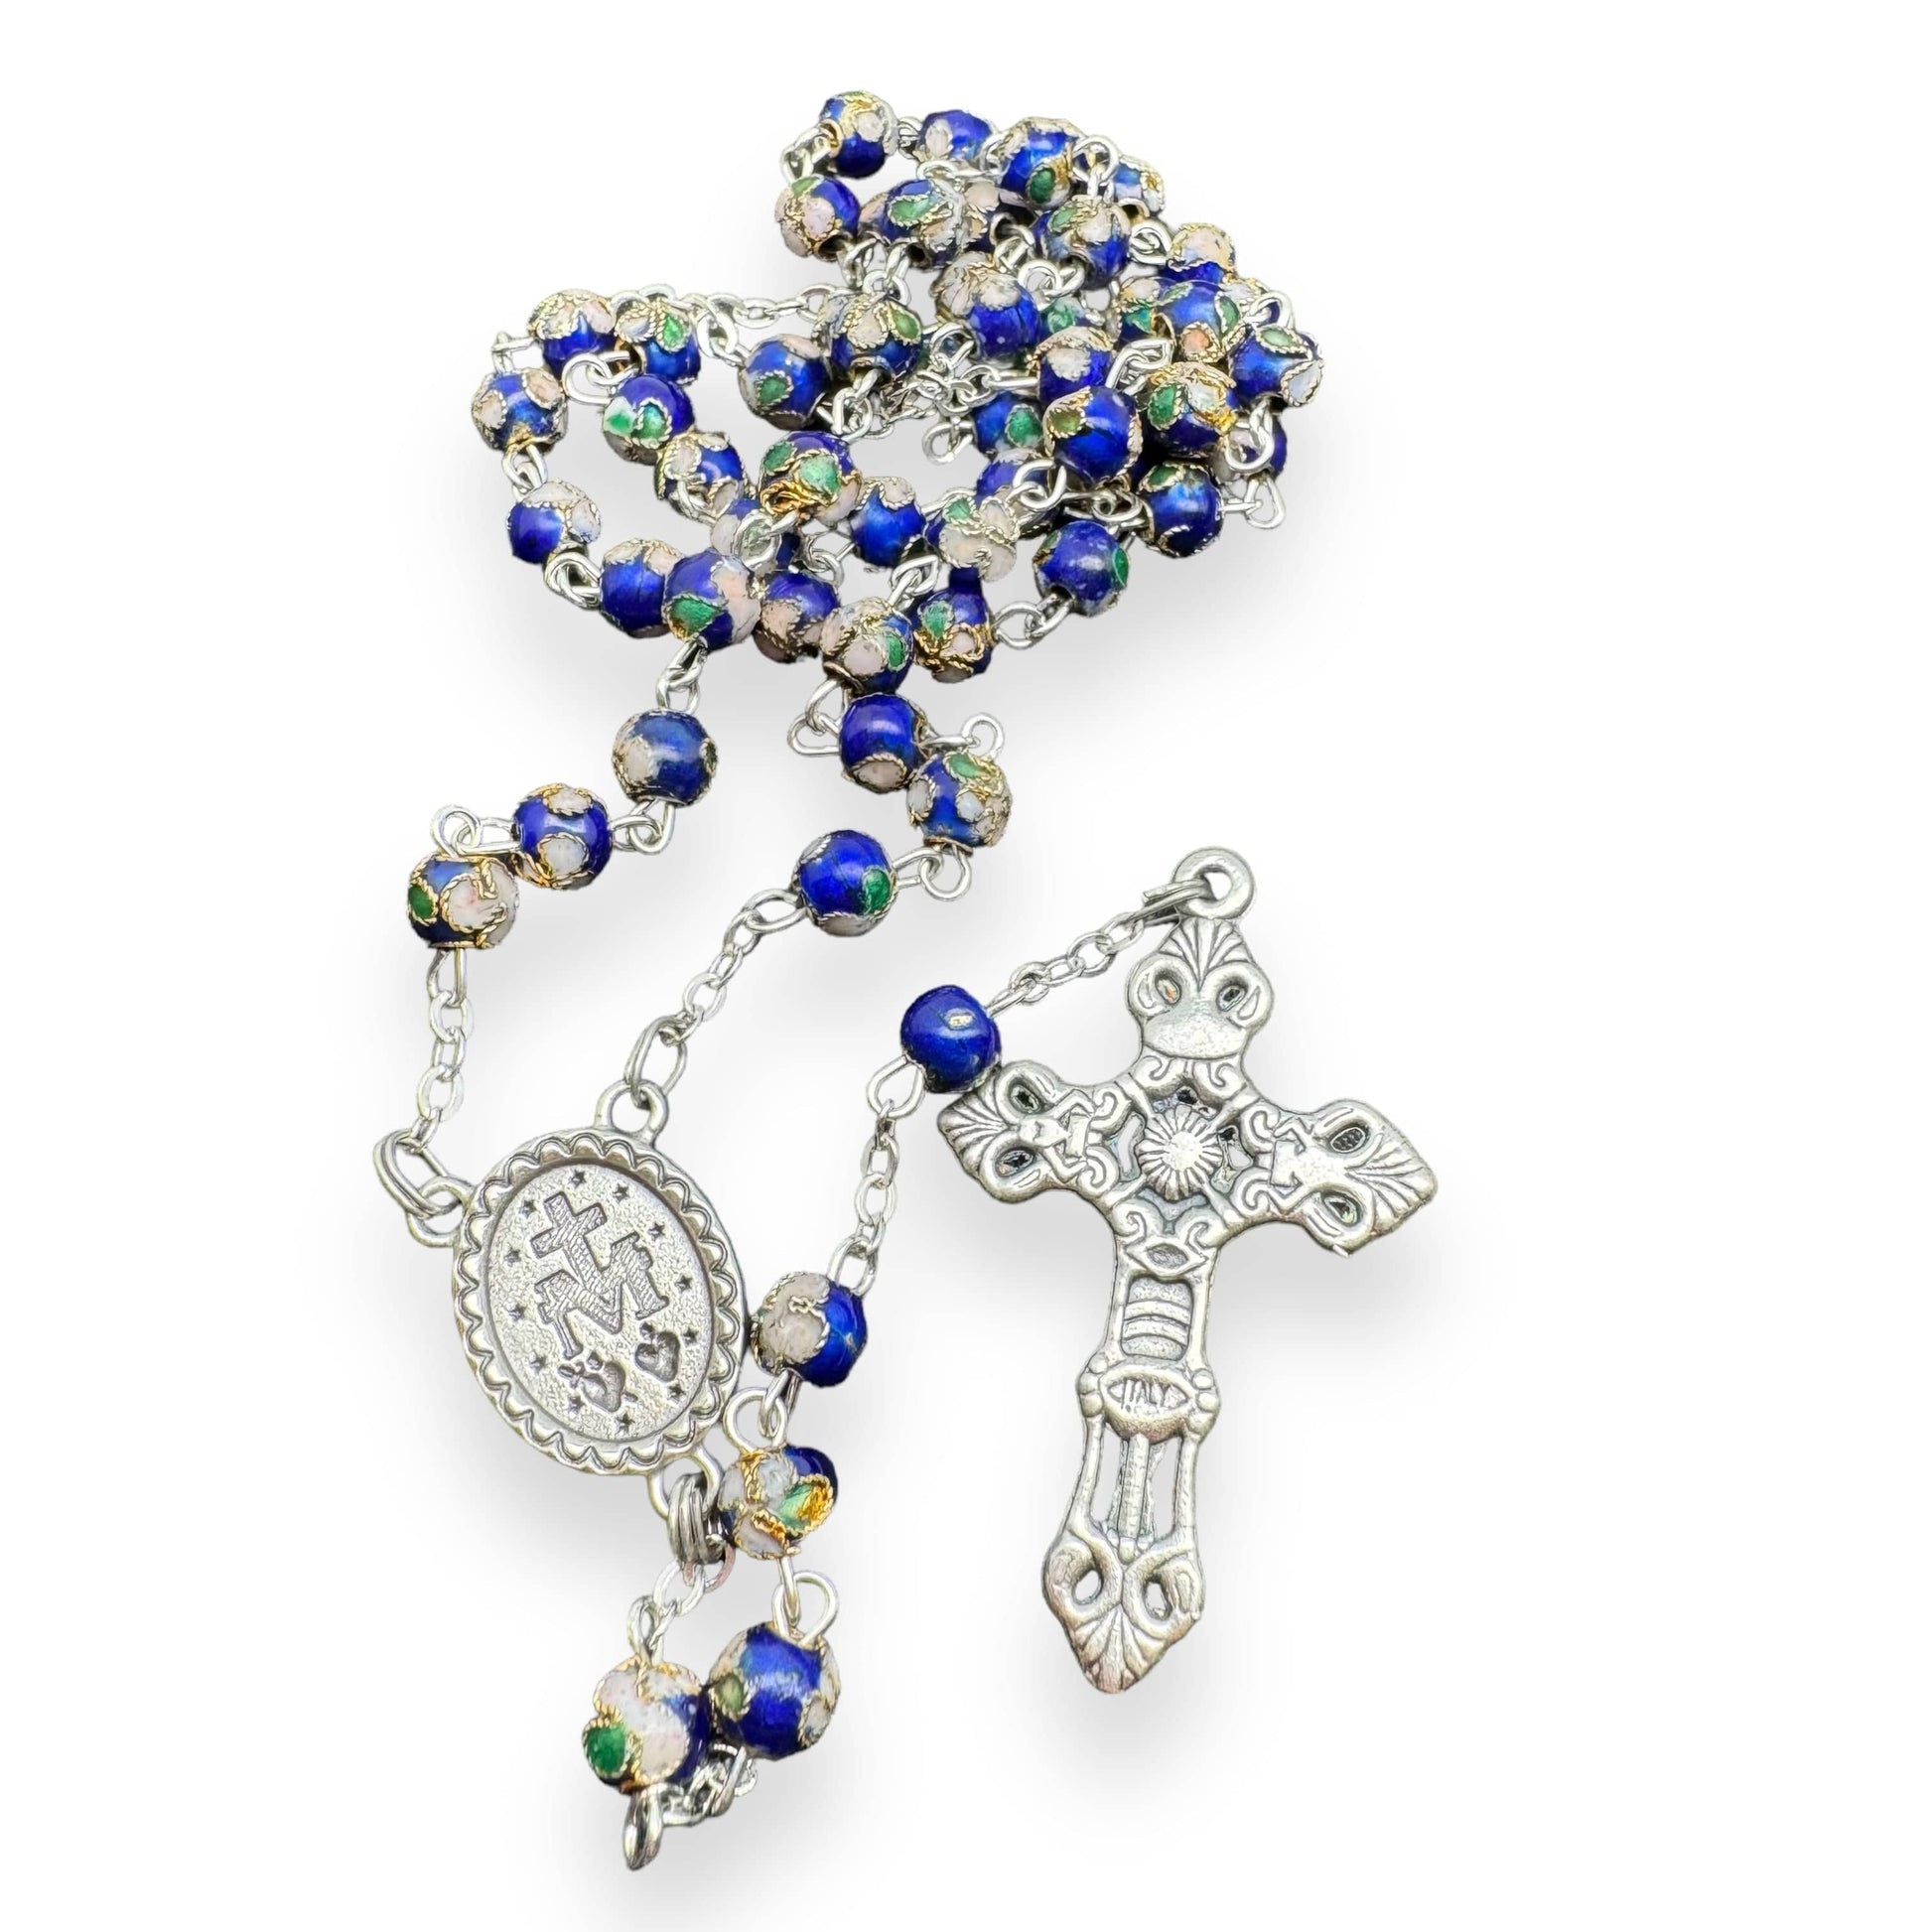 Catholically Rosaries Blue Cloisonne Rosary Small Beads - Catholic - Blessed By Pope  w/ Parchment